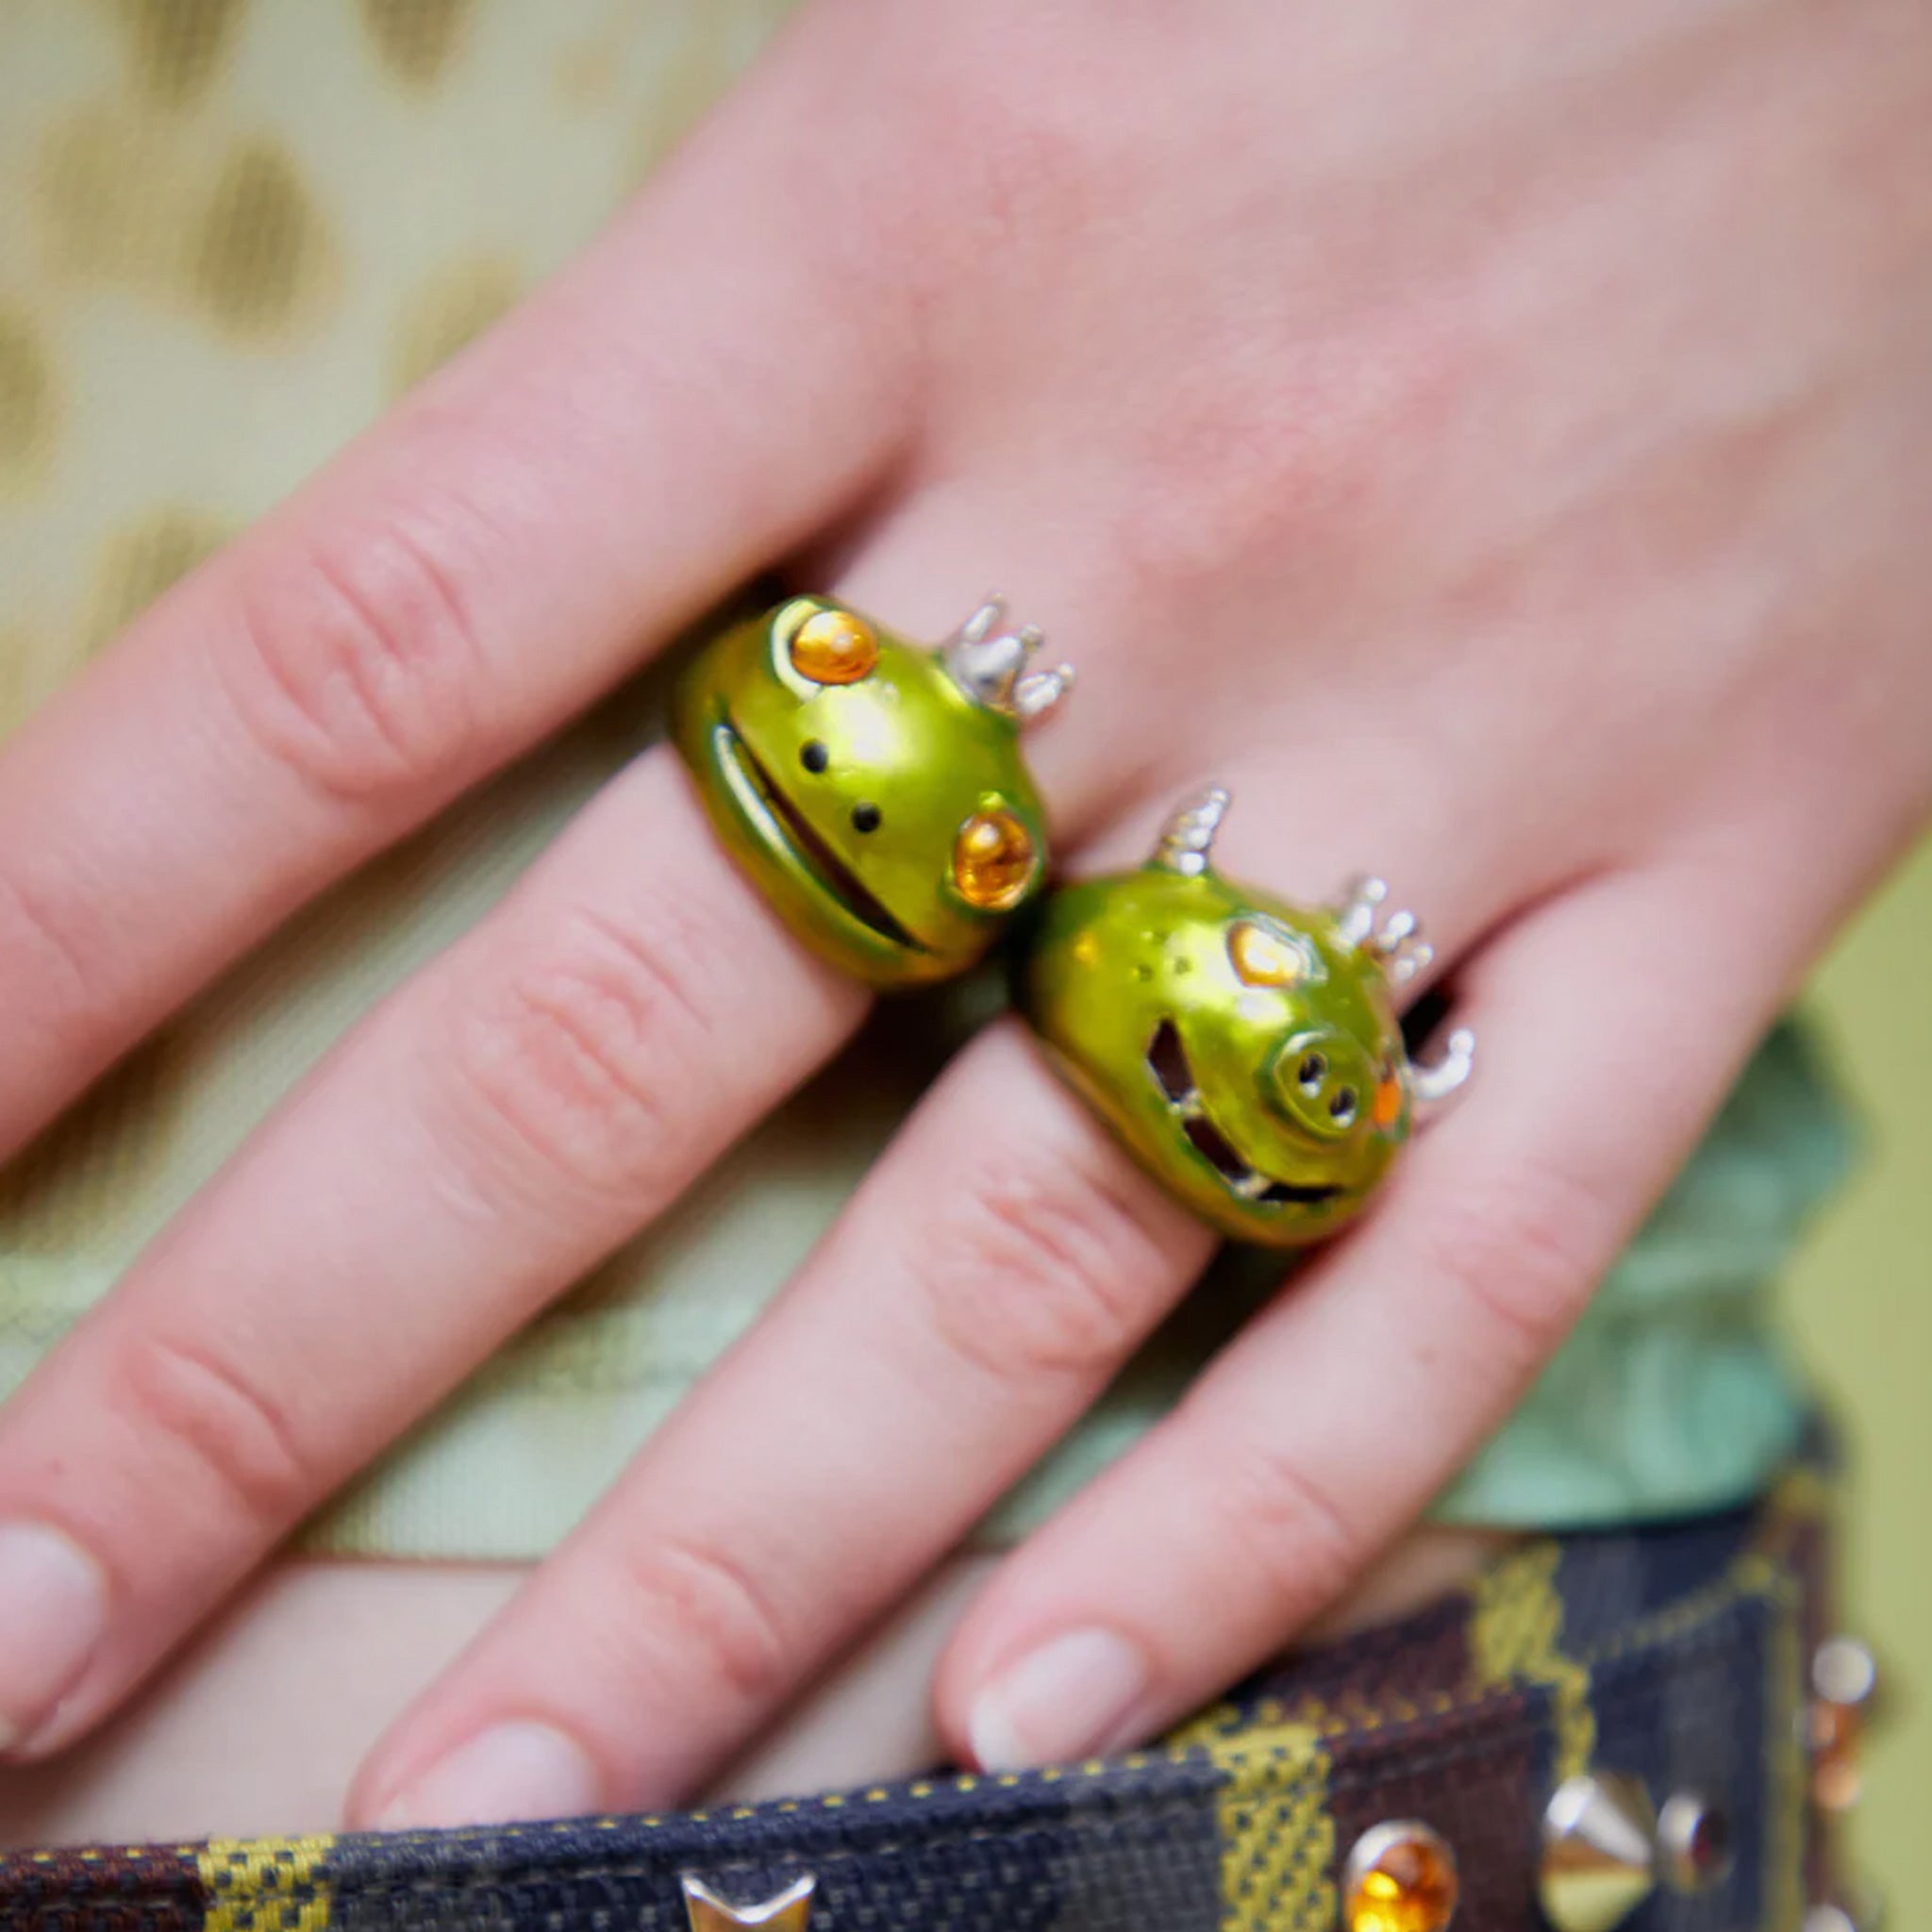 A model wears The Frog Prince Ring, a recycled pewter ring shaped like a frog's head wearing a tiny silver crown, hand painted in lime metallic green with golden glass eyes.